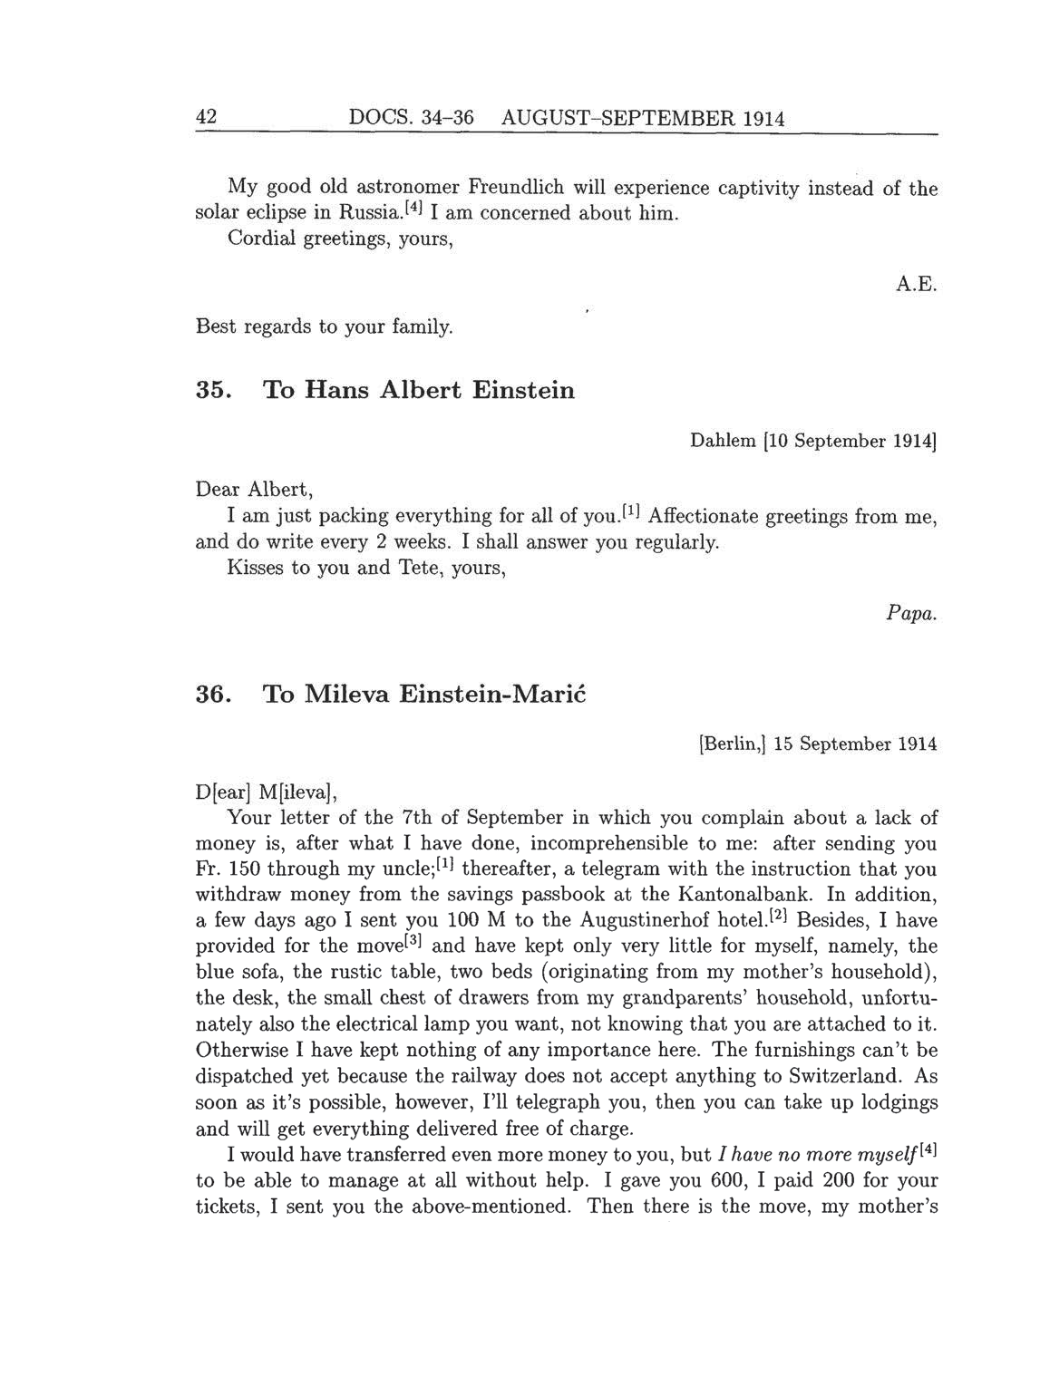 Volume 8: The Berlin Years: Correspondence, 1914-1918 (English translation supplement) page 42